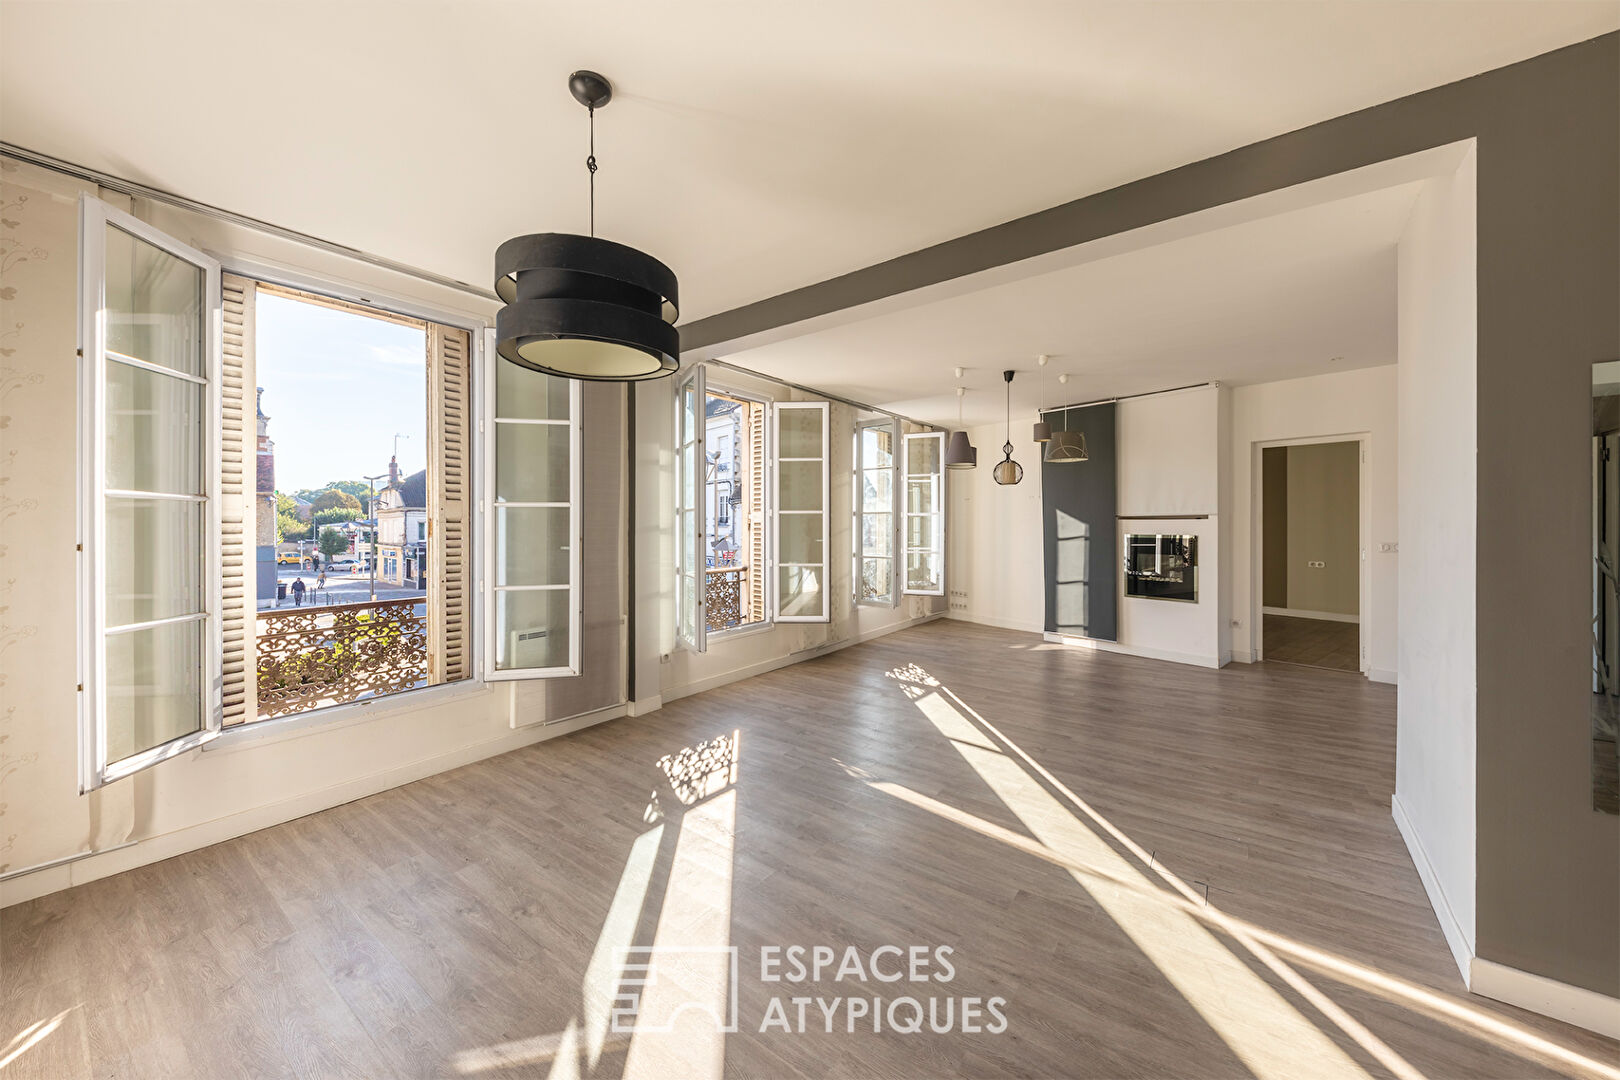 THE SPACIOUS – Apartment in the city center with a view